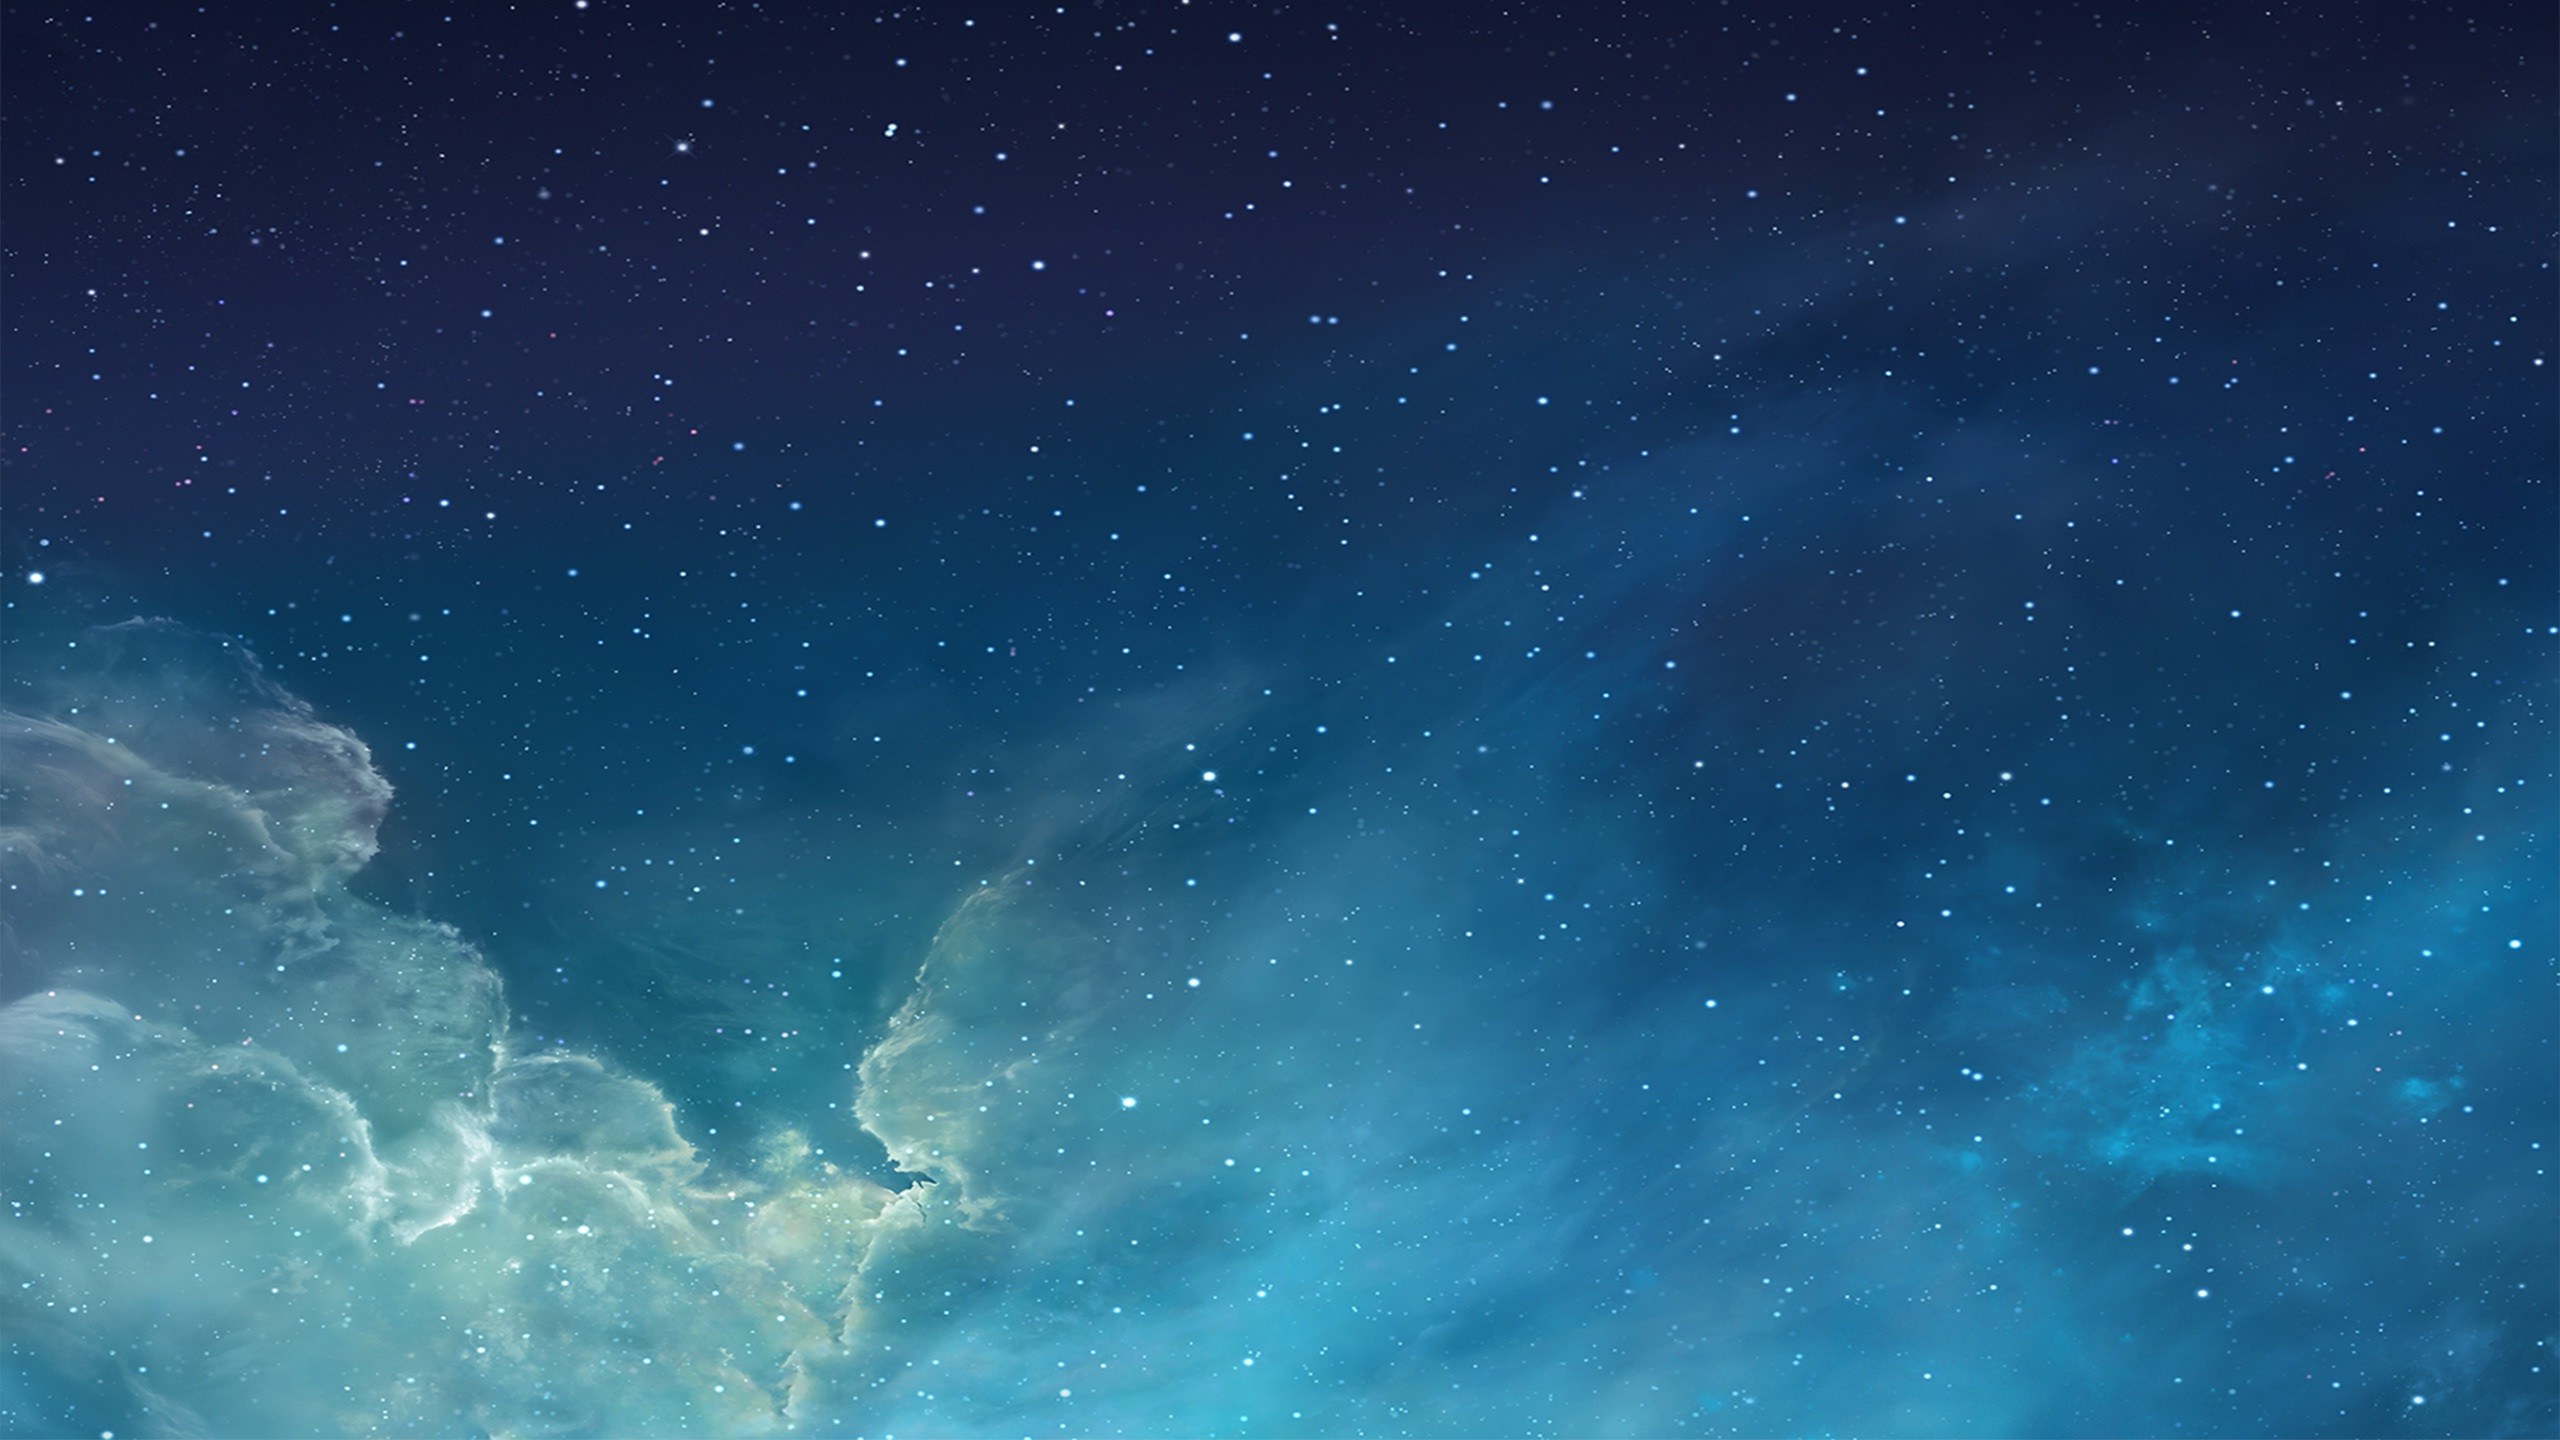 Wallpaper Galaxy 95 Wallpapers  HD Wallpapers  Night sky wallpaper  Starry night wallpaper Starry night background